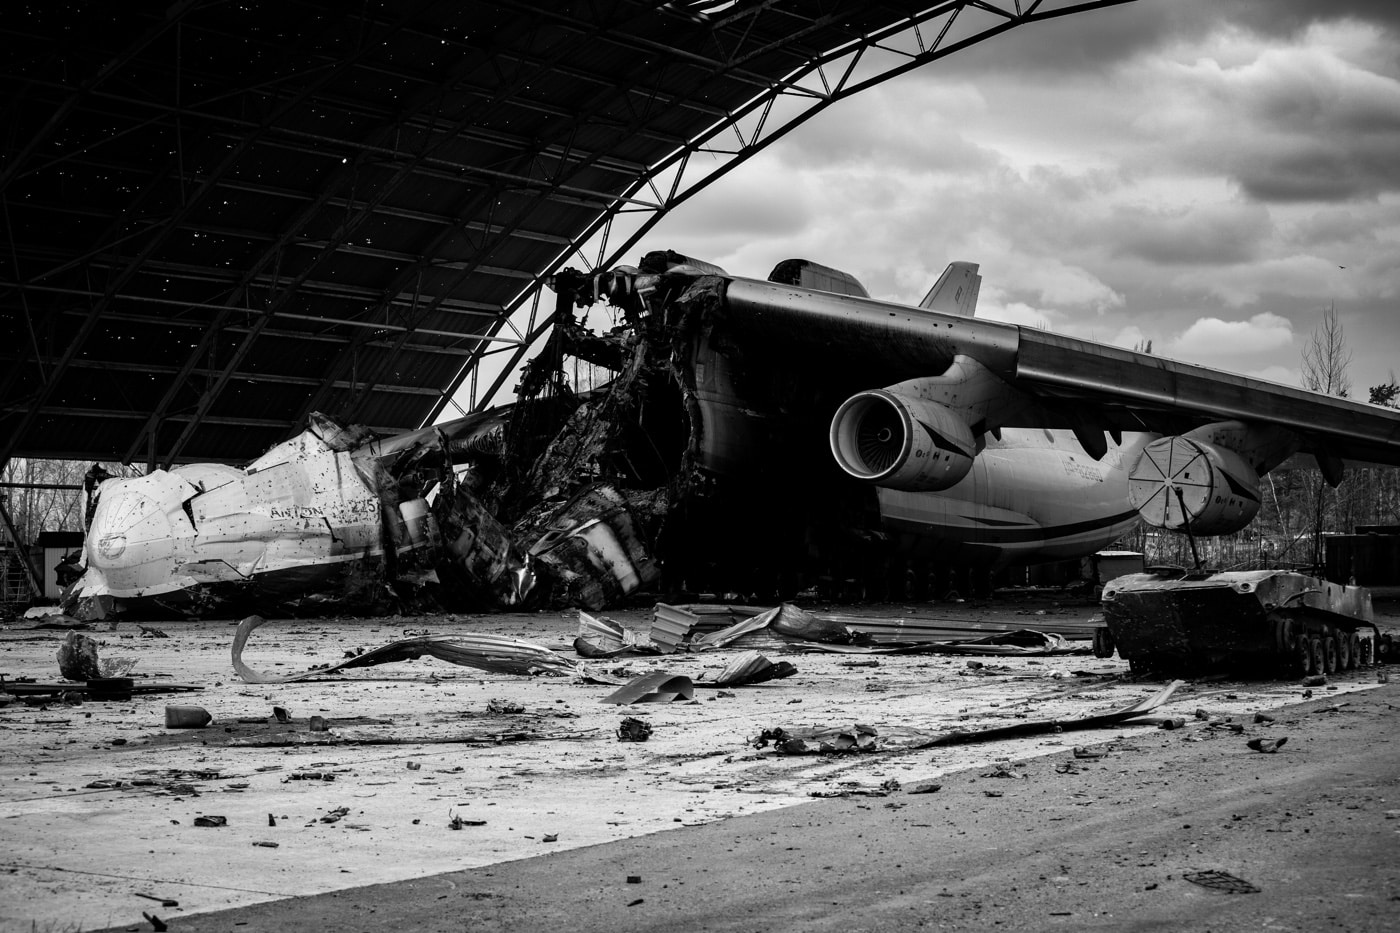 In this black and white photograph, we see the unique Antonov An-225 plane that was destroyed during the fighting. It was the only aircraft of its design that was ever completely built. 